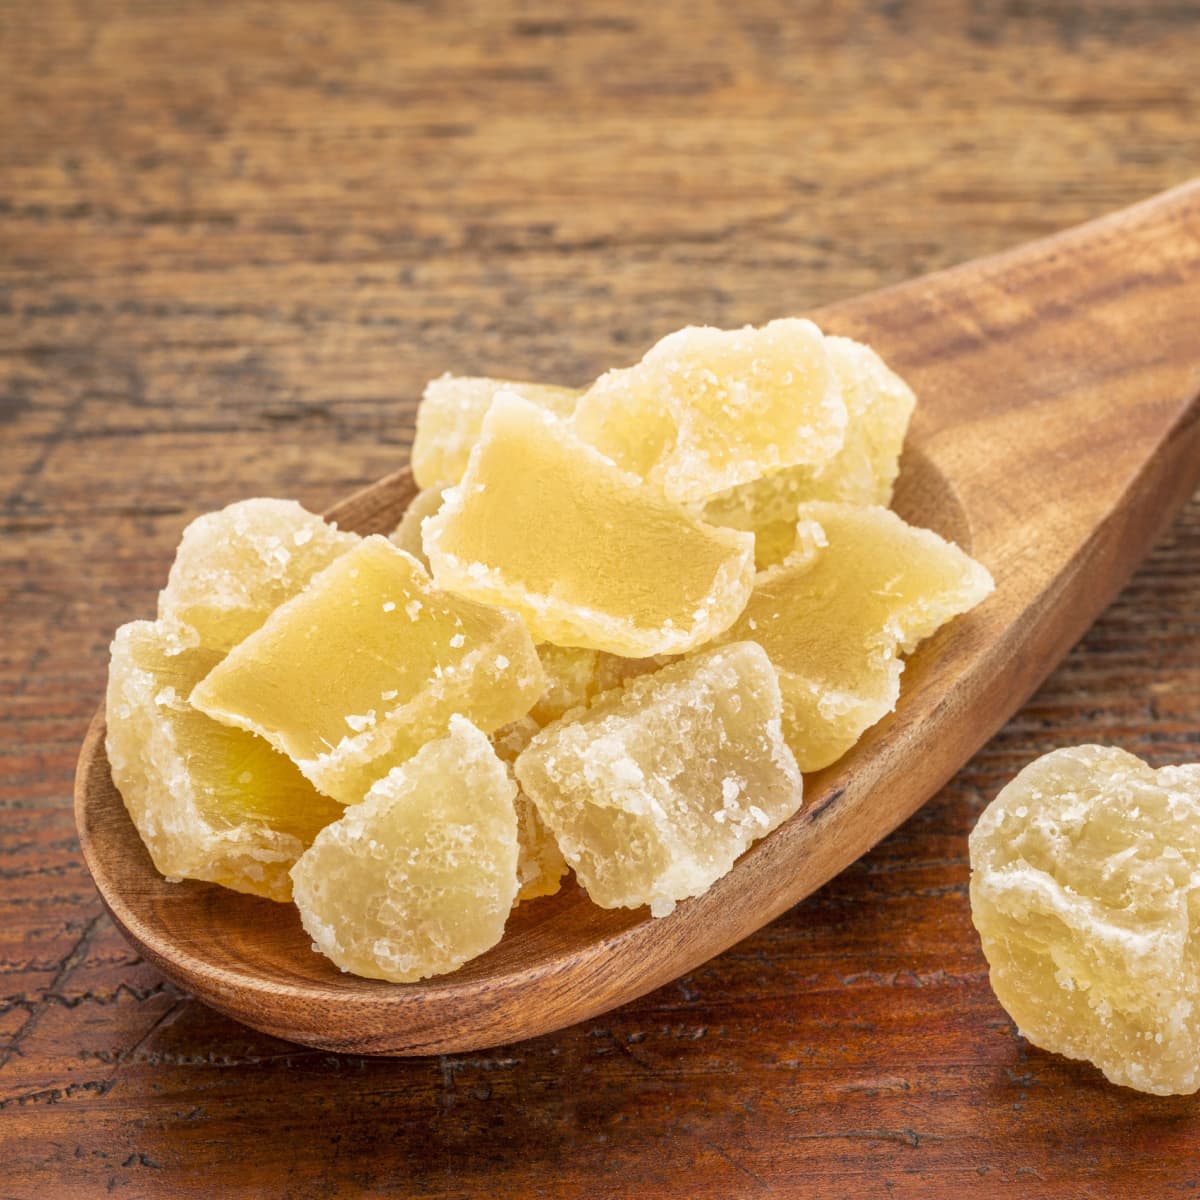 Chunks of Crystallized Ginger on a Wooden Spoon